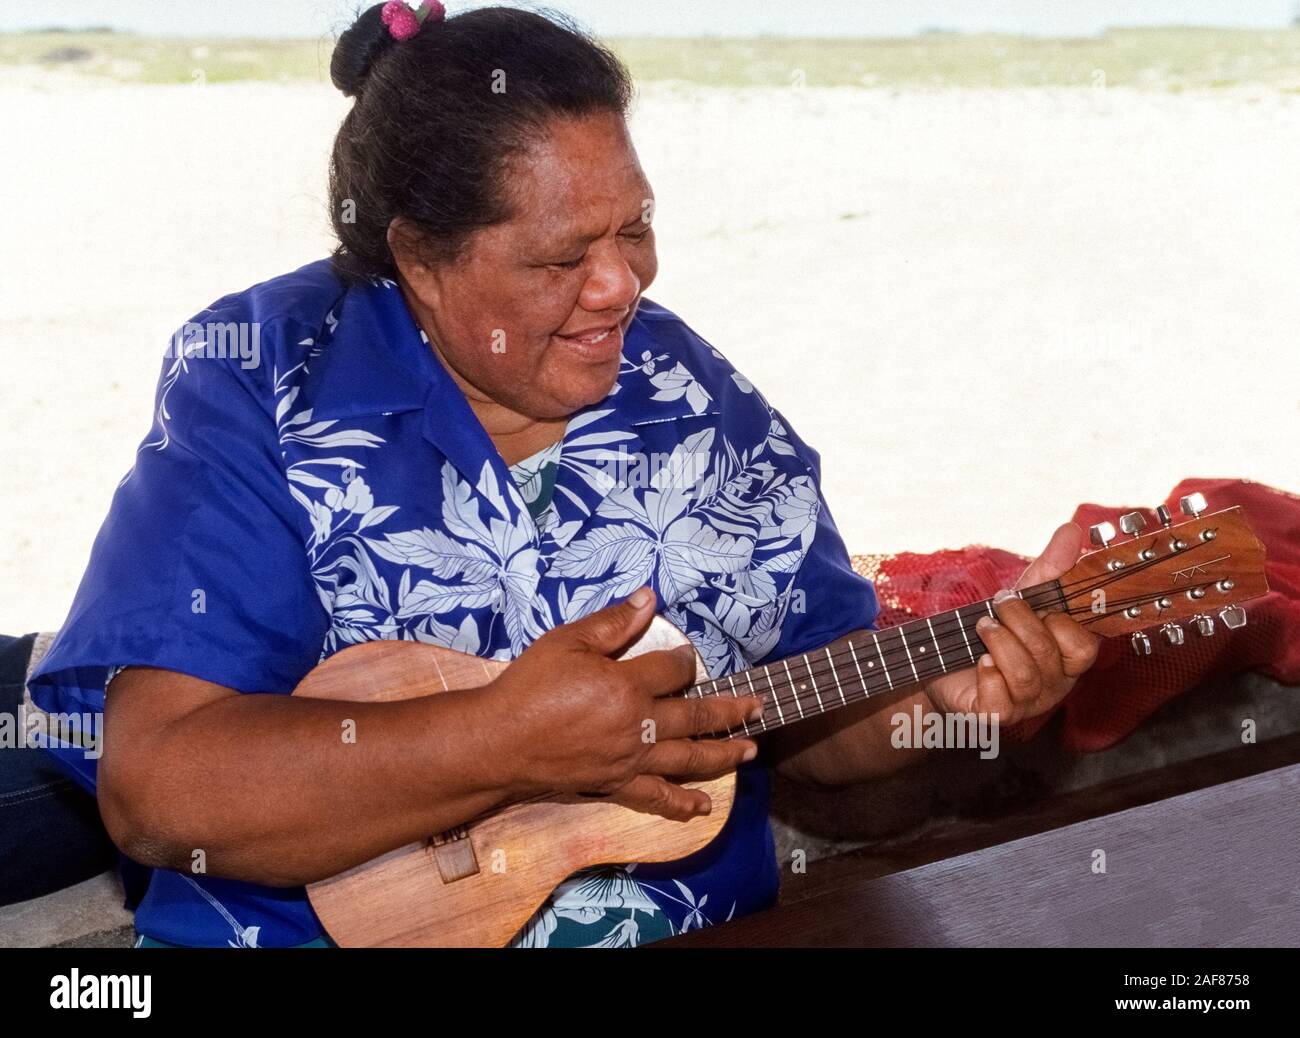 A Native Hawaiian woman entertains with song and her ukelele a few visitors to Niihau, an isolated Pacific Ocean island in Hawaii, USA. It is known as the Forbidden Island because only Niihauans born on the island are permitted to live there and tourists are limited to a helicopter excursion to visit its shores for only a few hours. Privately owned by the same family since they purchased it from the king of Hawaii in 1864, the 72-square-mile (187 square-kilometer) island has less than 170 residents and is dedicated to preserving traditional Hawaiian culture. Stock Photo